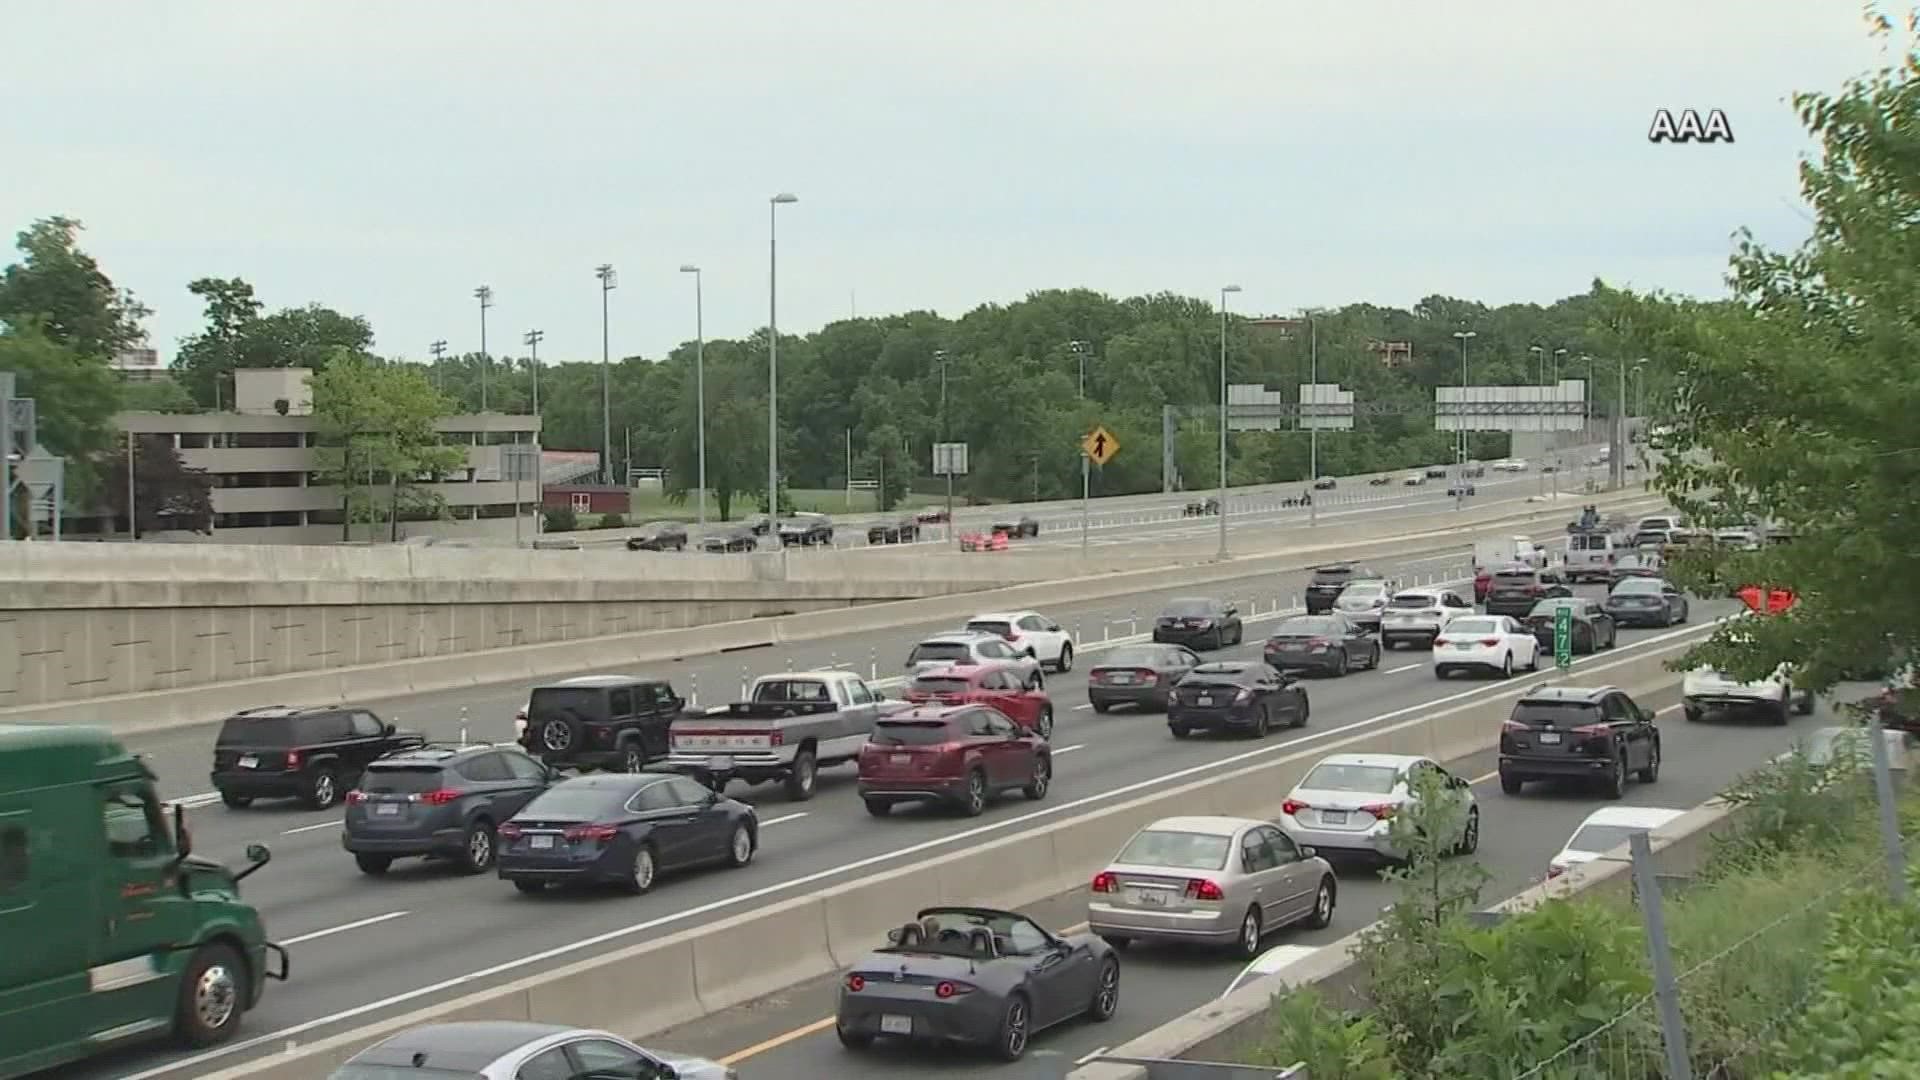 These are the latest updates on Memorial Day weekend travel from our morning newscast on Saturday, May 28.